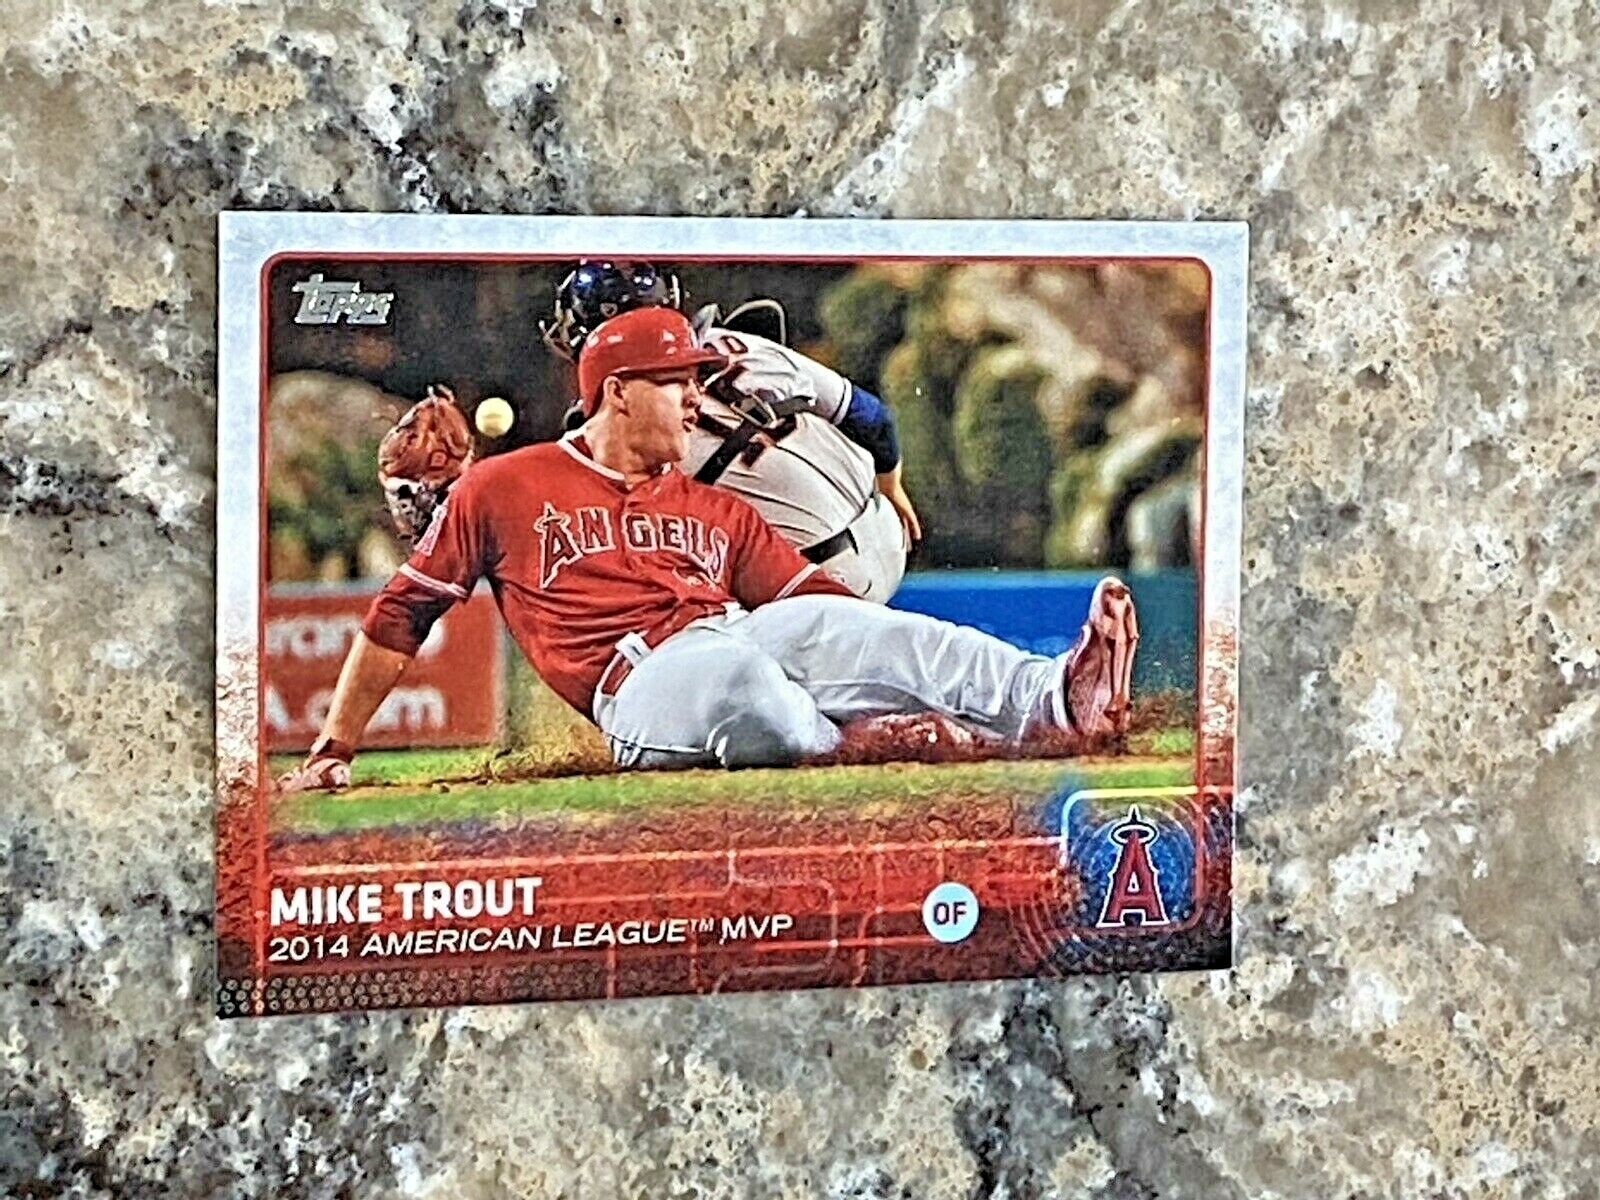 2015 Topps Series 2 Mike Trout #510 Los Angeles Angels MLB Baseball Card